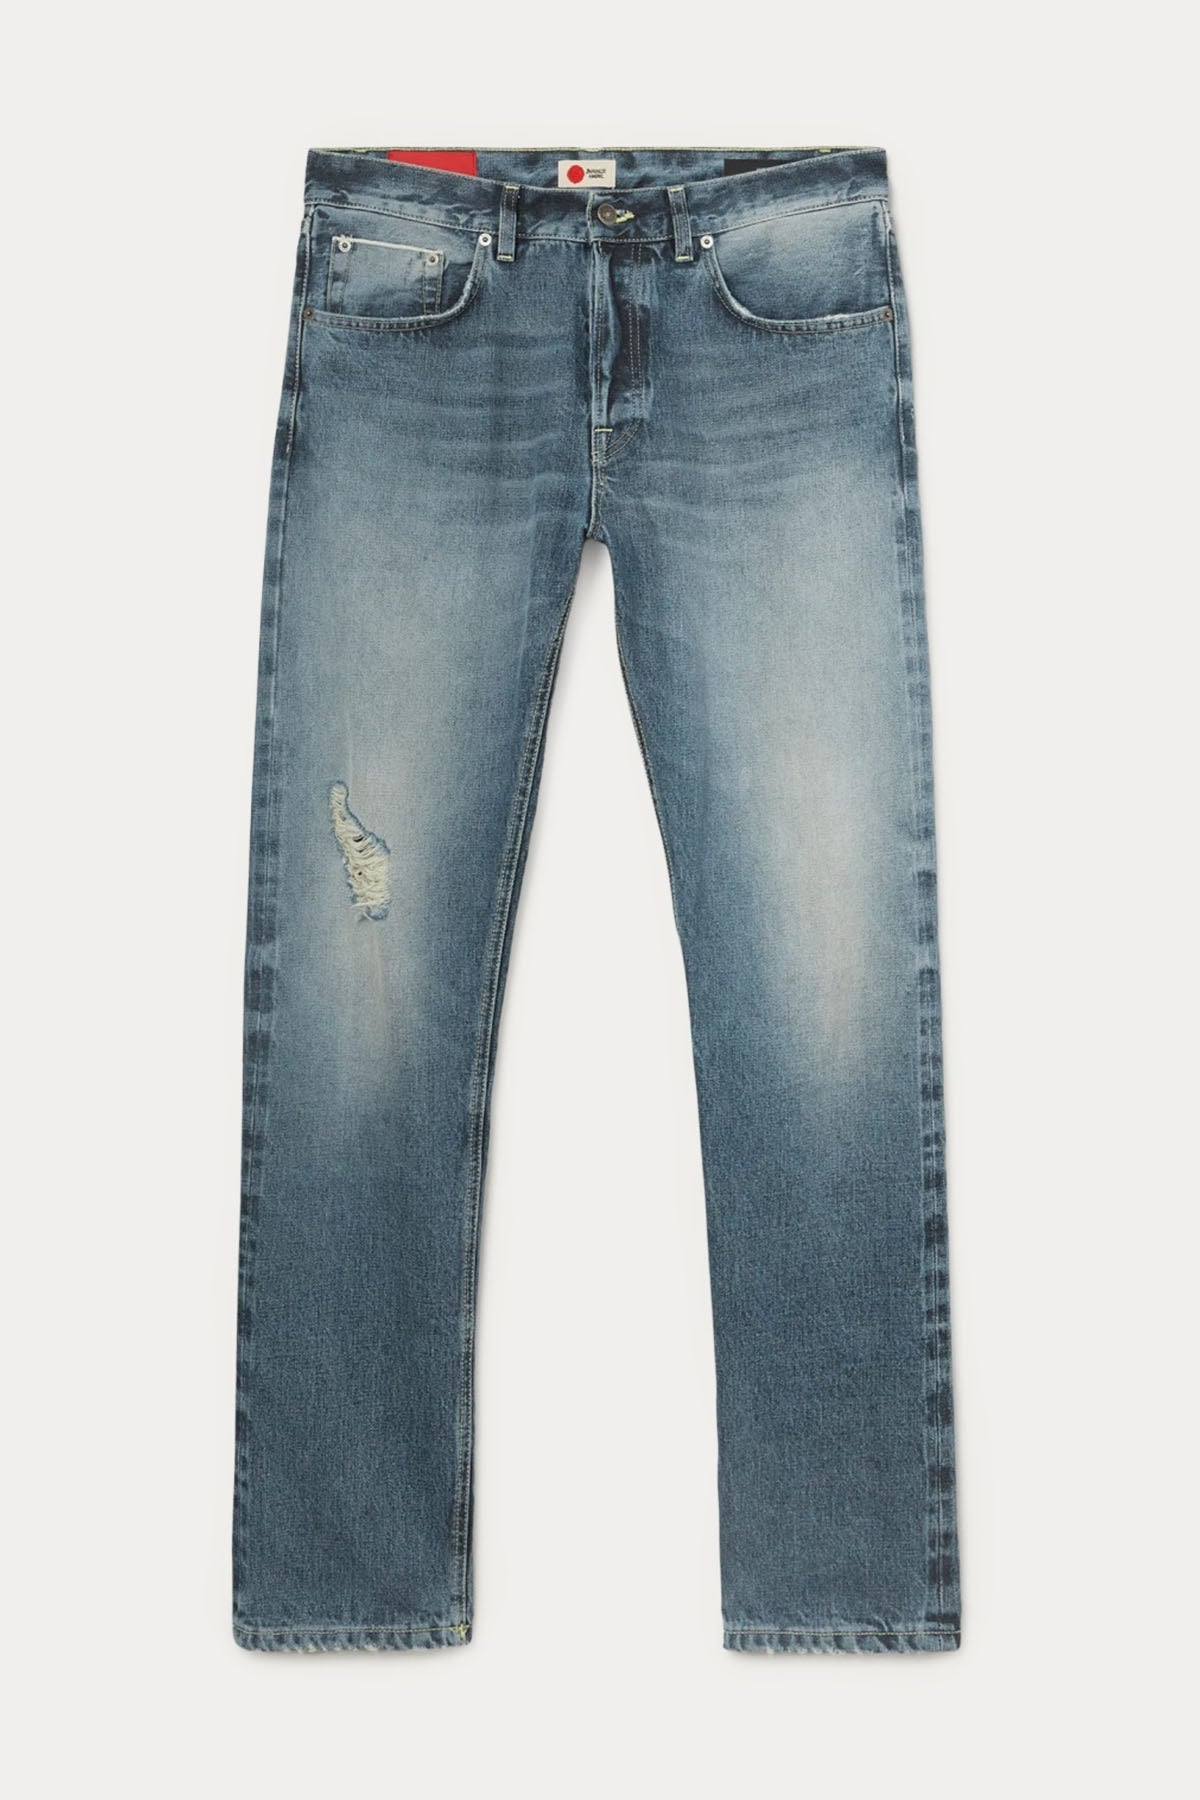 Dondup Icon Regular Fit Jeans